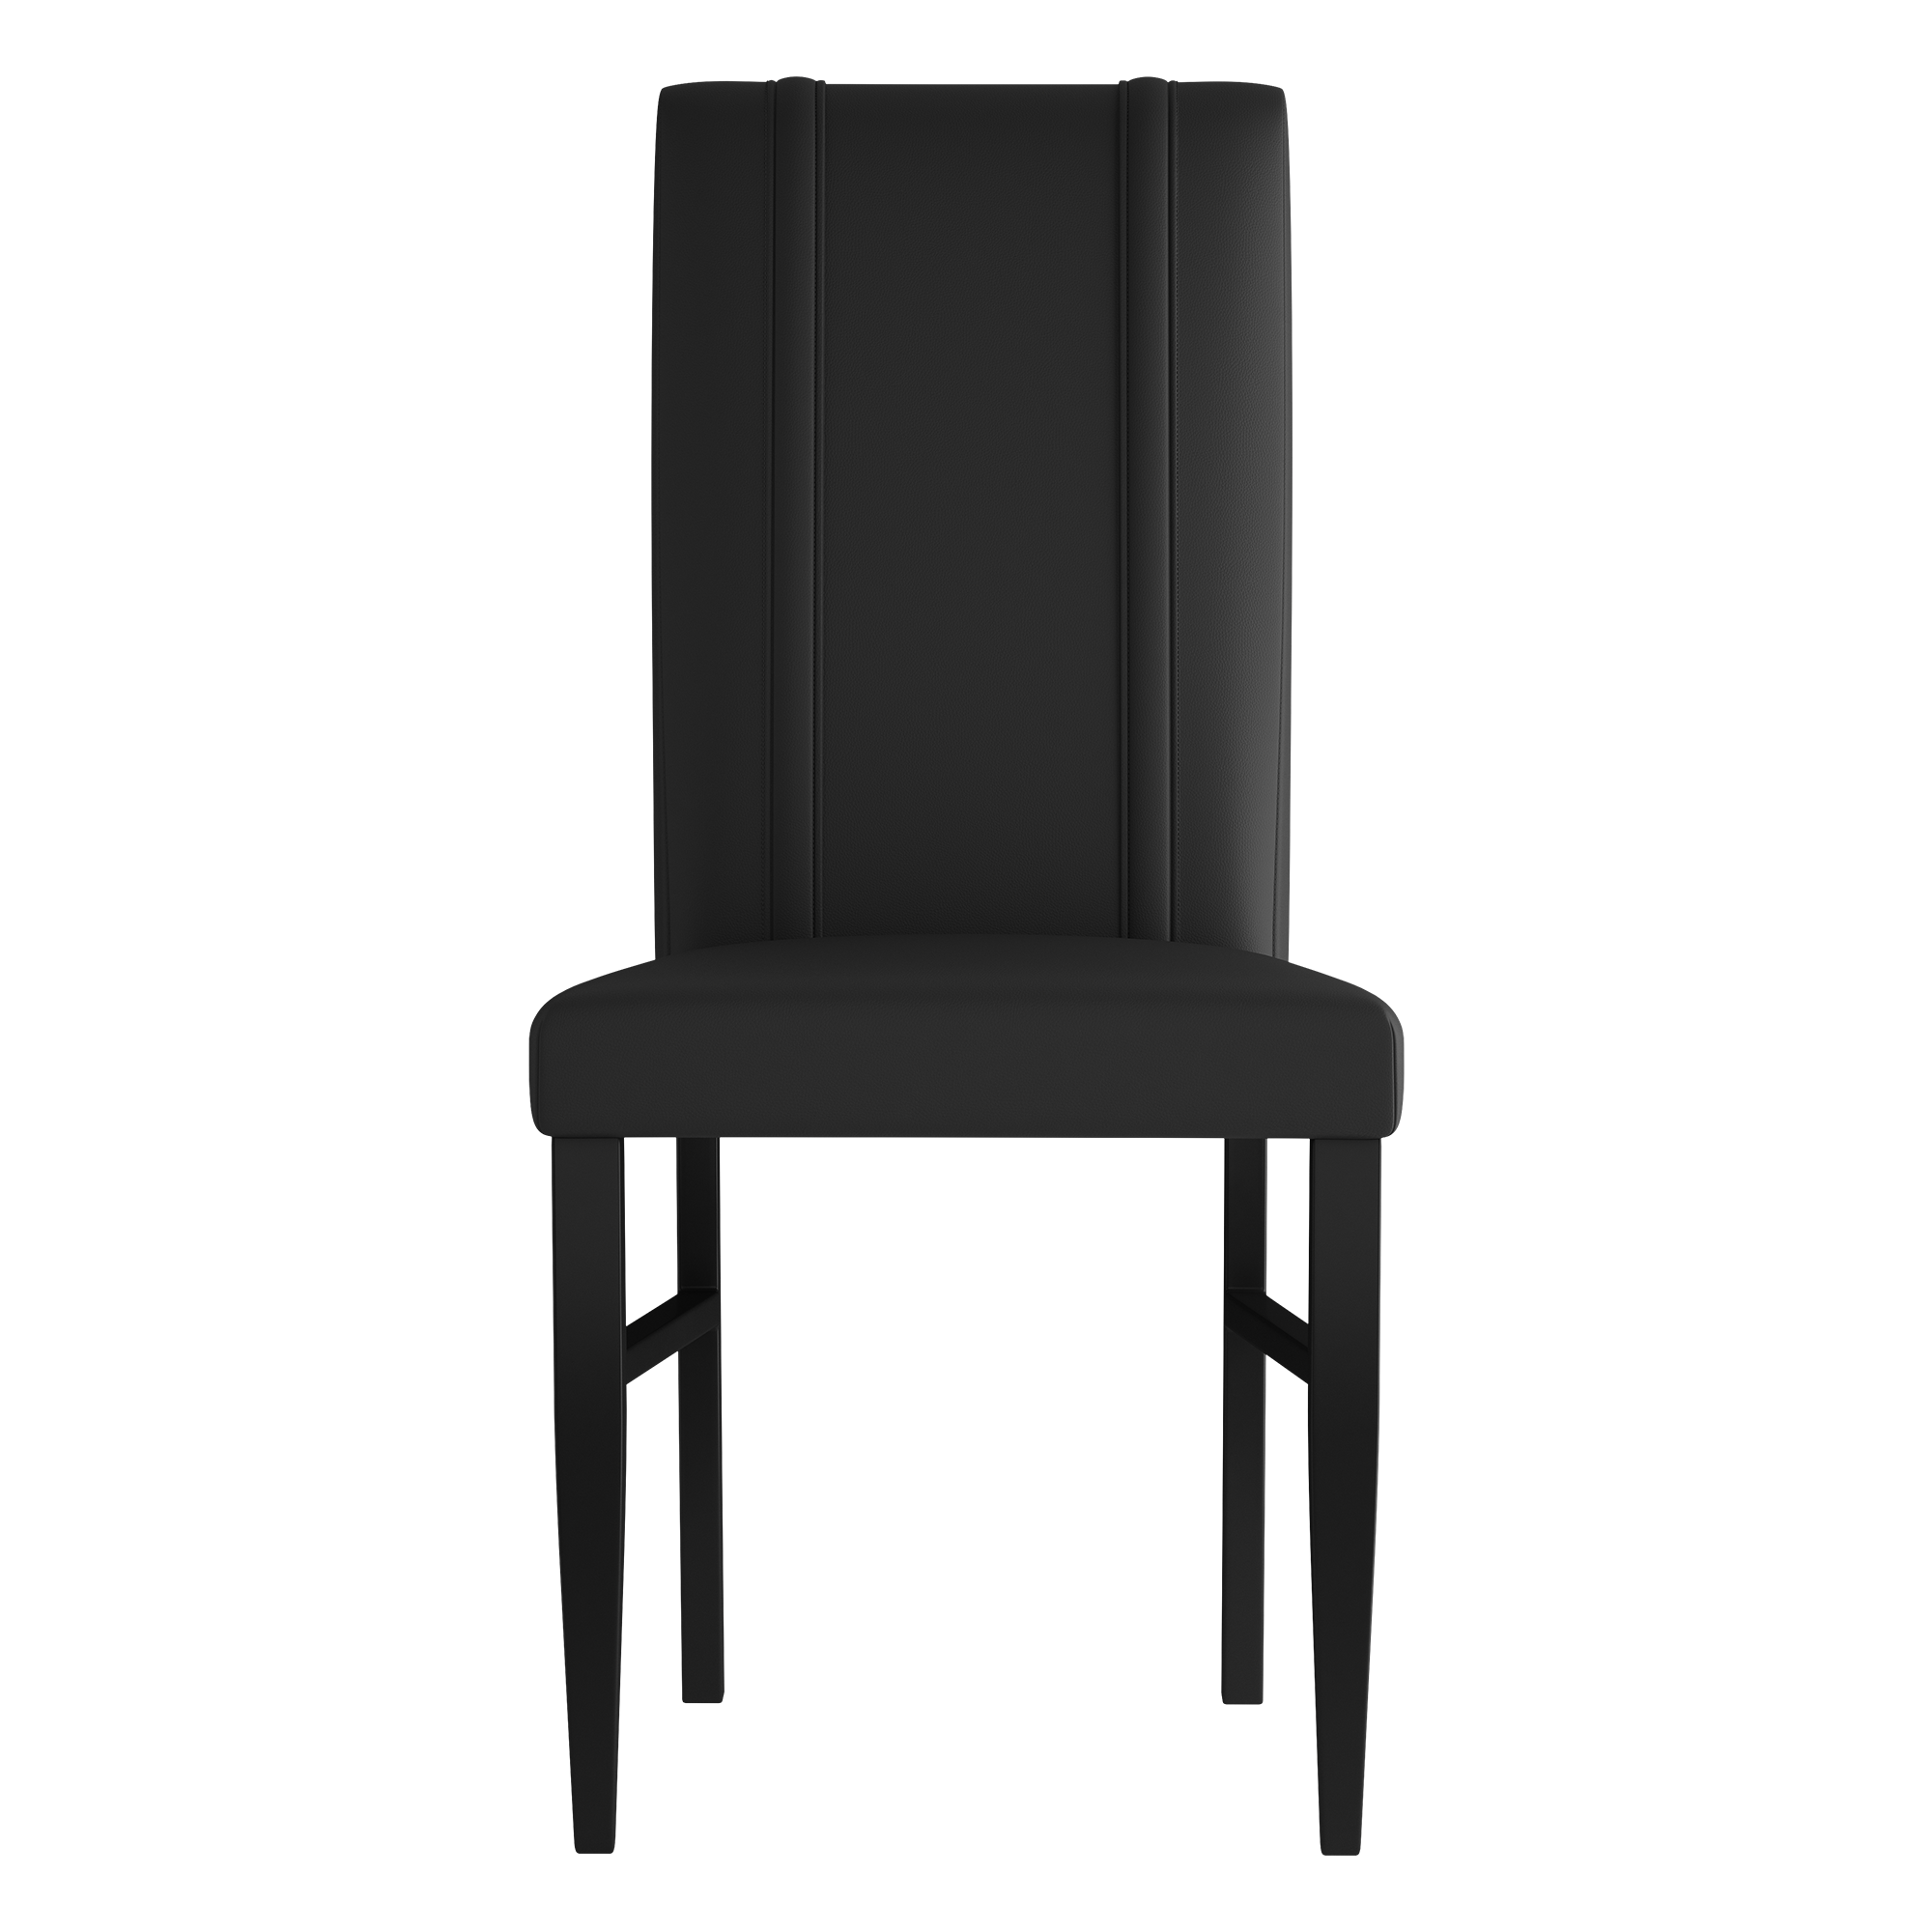 Side Chair 2000 with Baseball Pitcher Logo Panel Set of 2